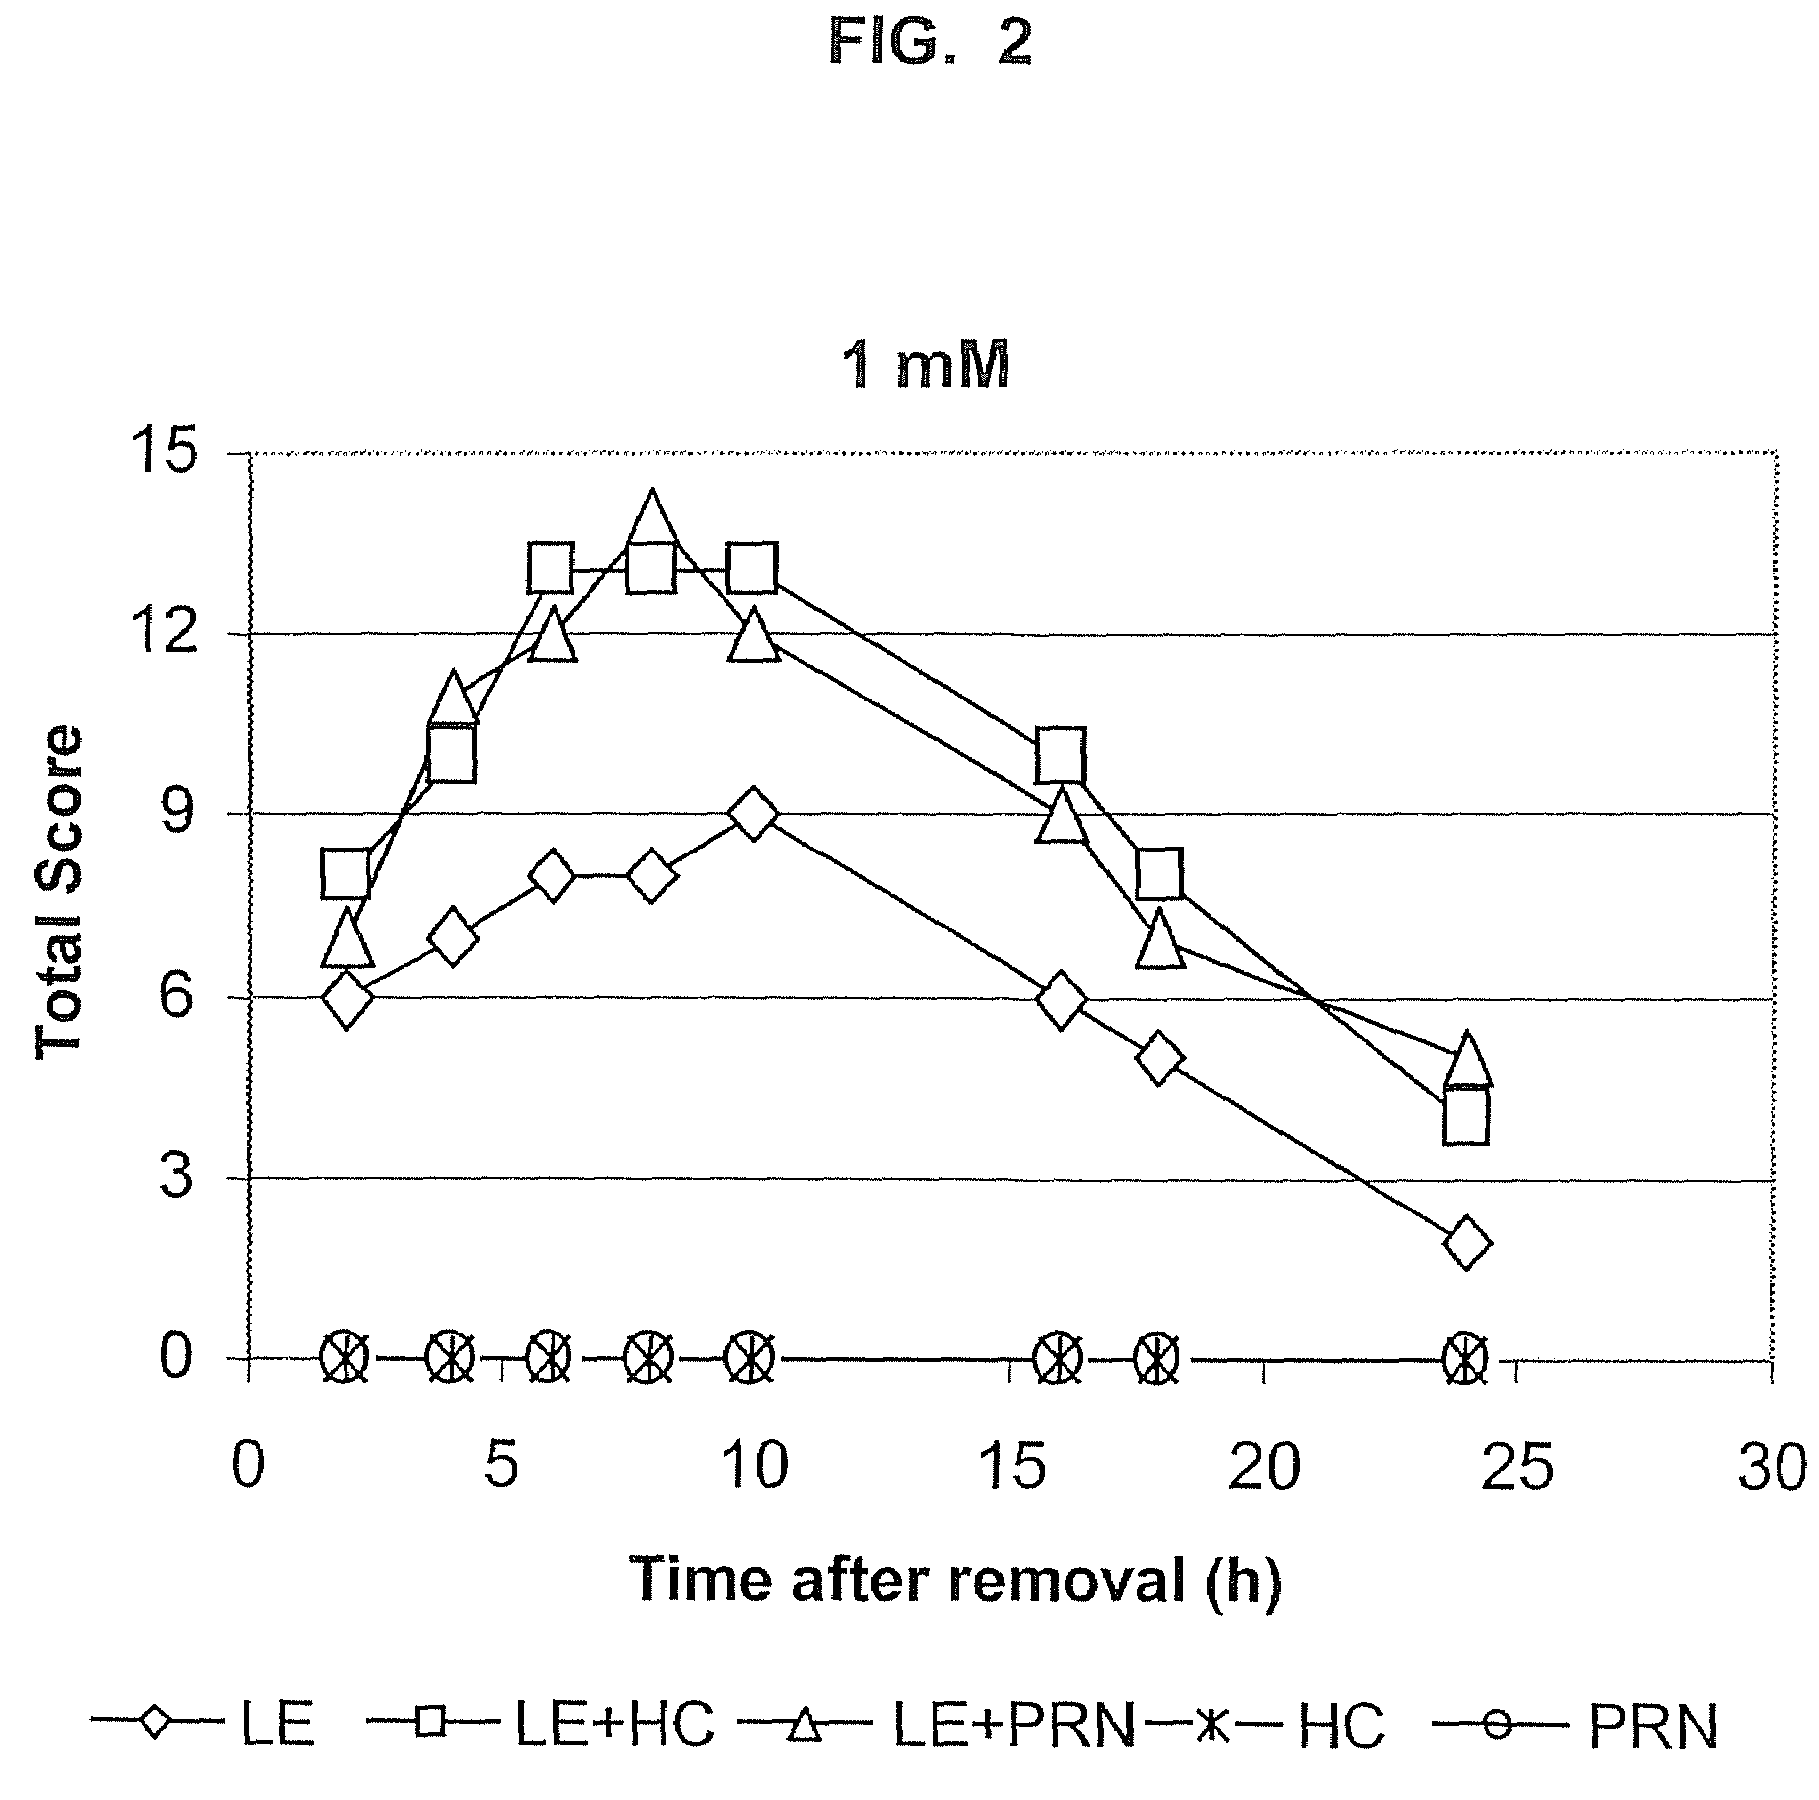 Transporter-enhanced corticosteroid activity and methods and compositions for treating dry eye